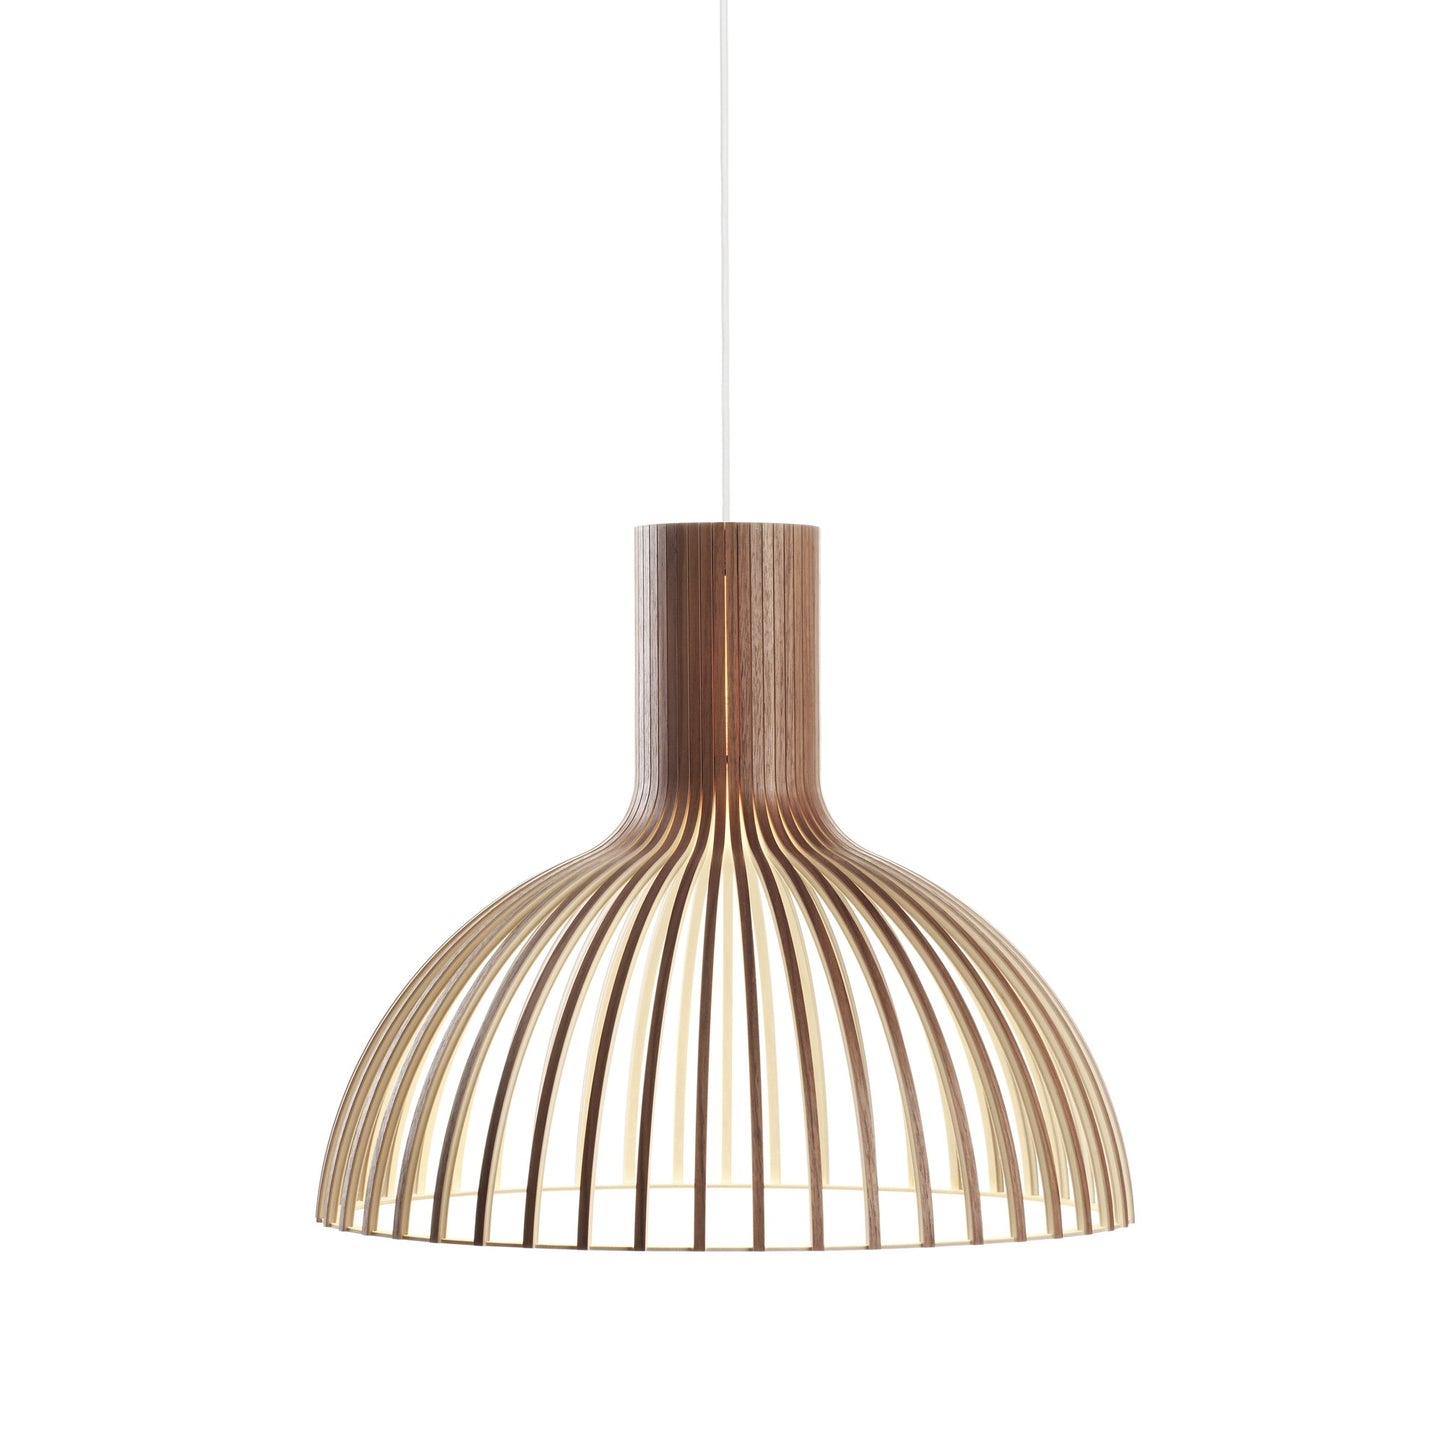 Victo 4250 Pendant Lamp by Secto #Walnut